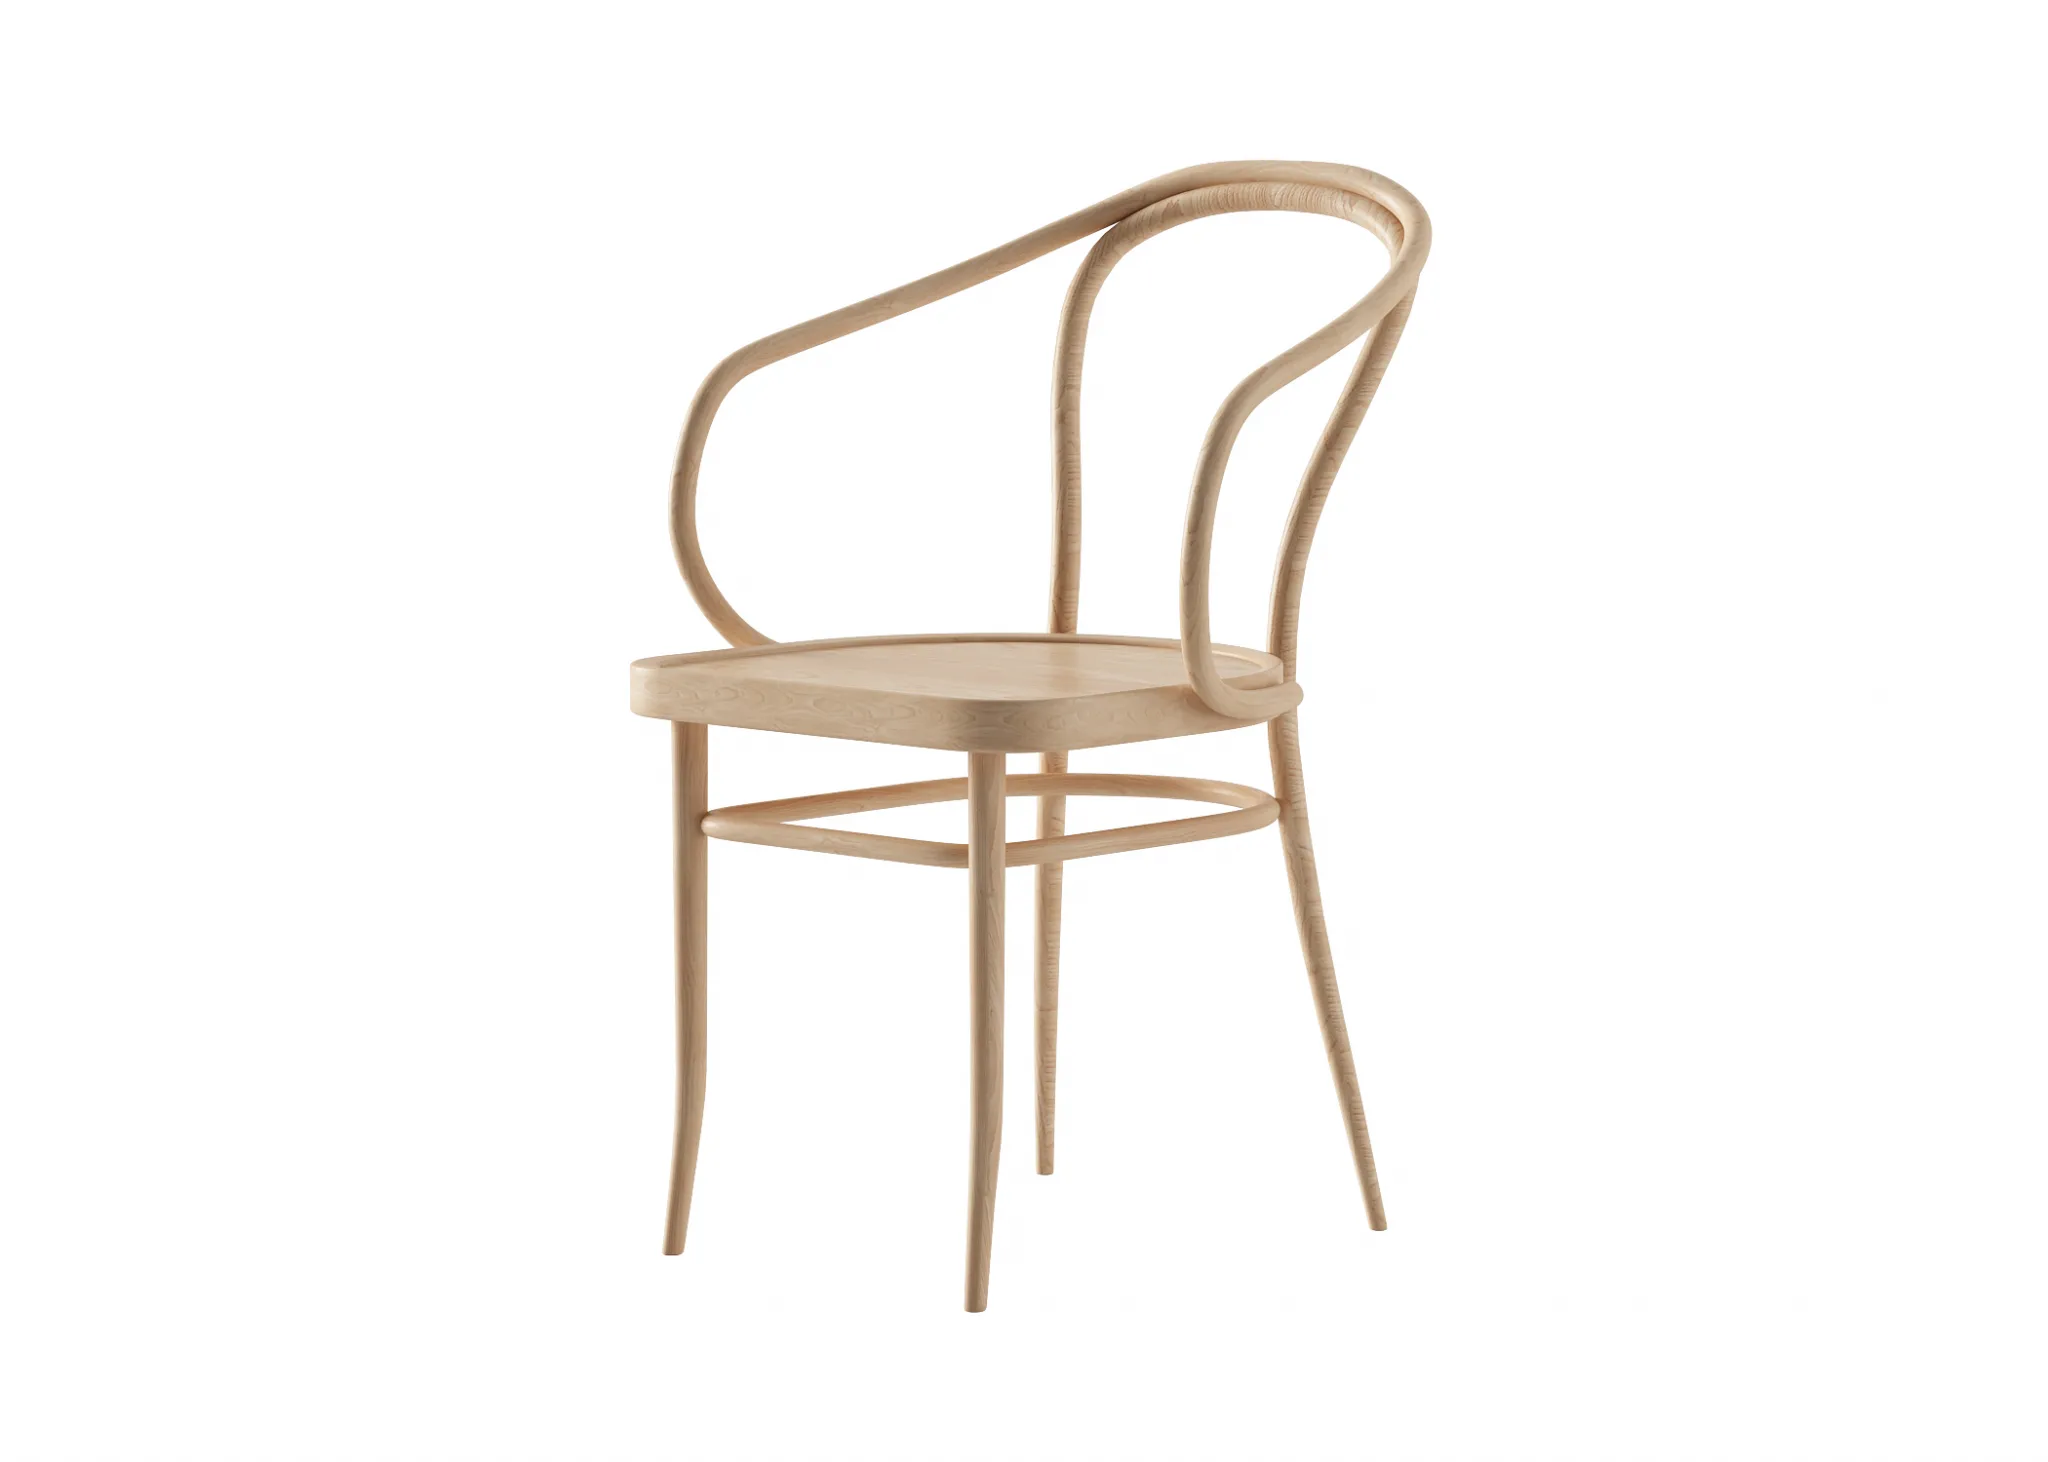 FURNITURE 3D MODELS – CHAIRS – 0326